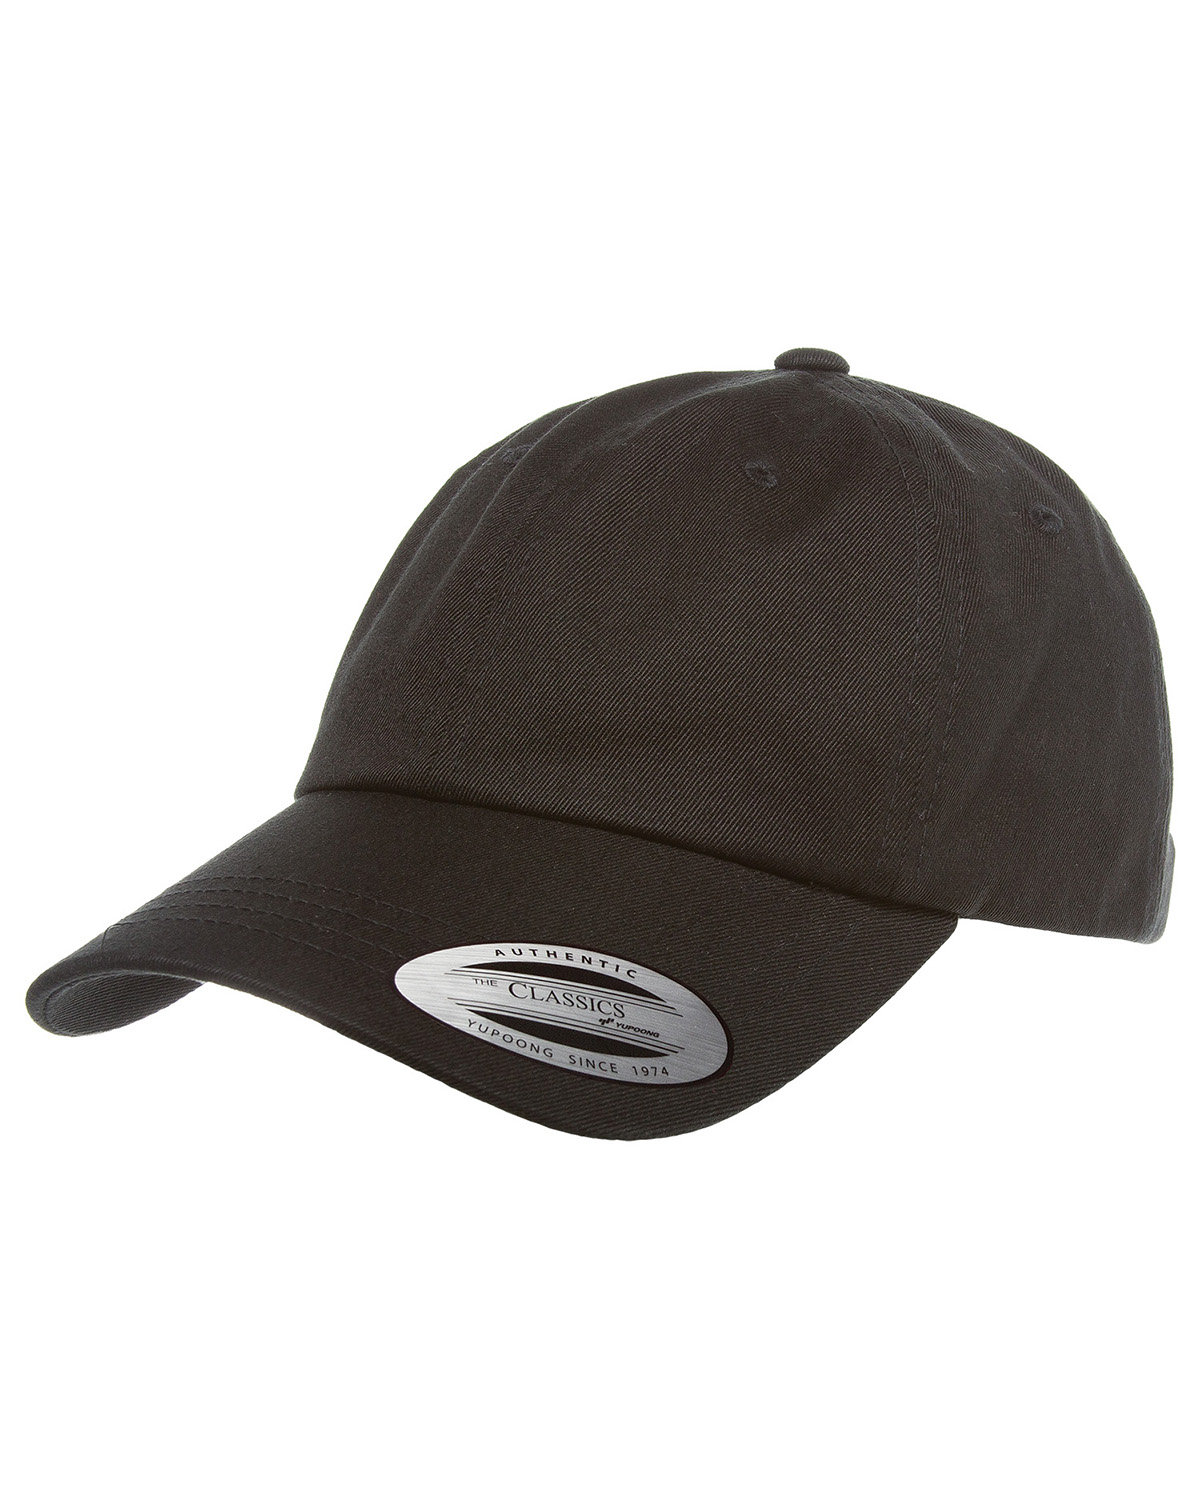 Yupoong Adult Low-Profile Cotton Twill Dad Cap BLACK 